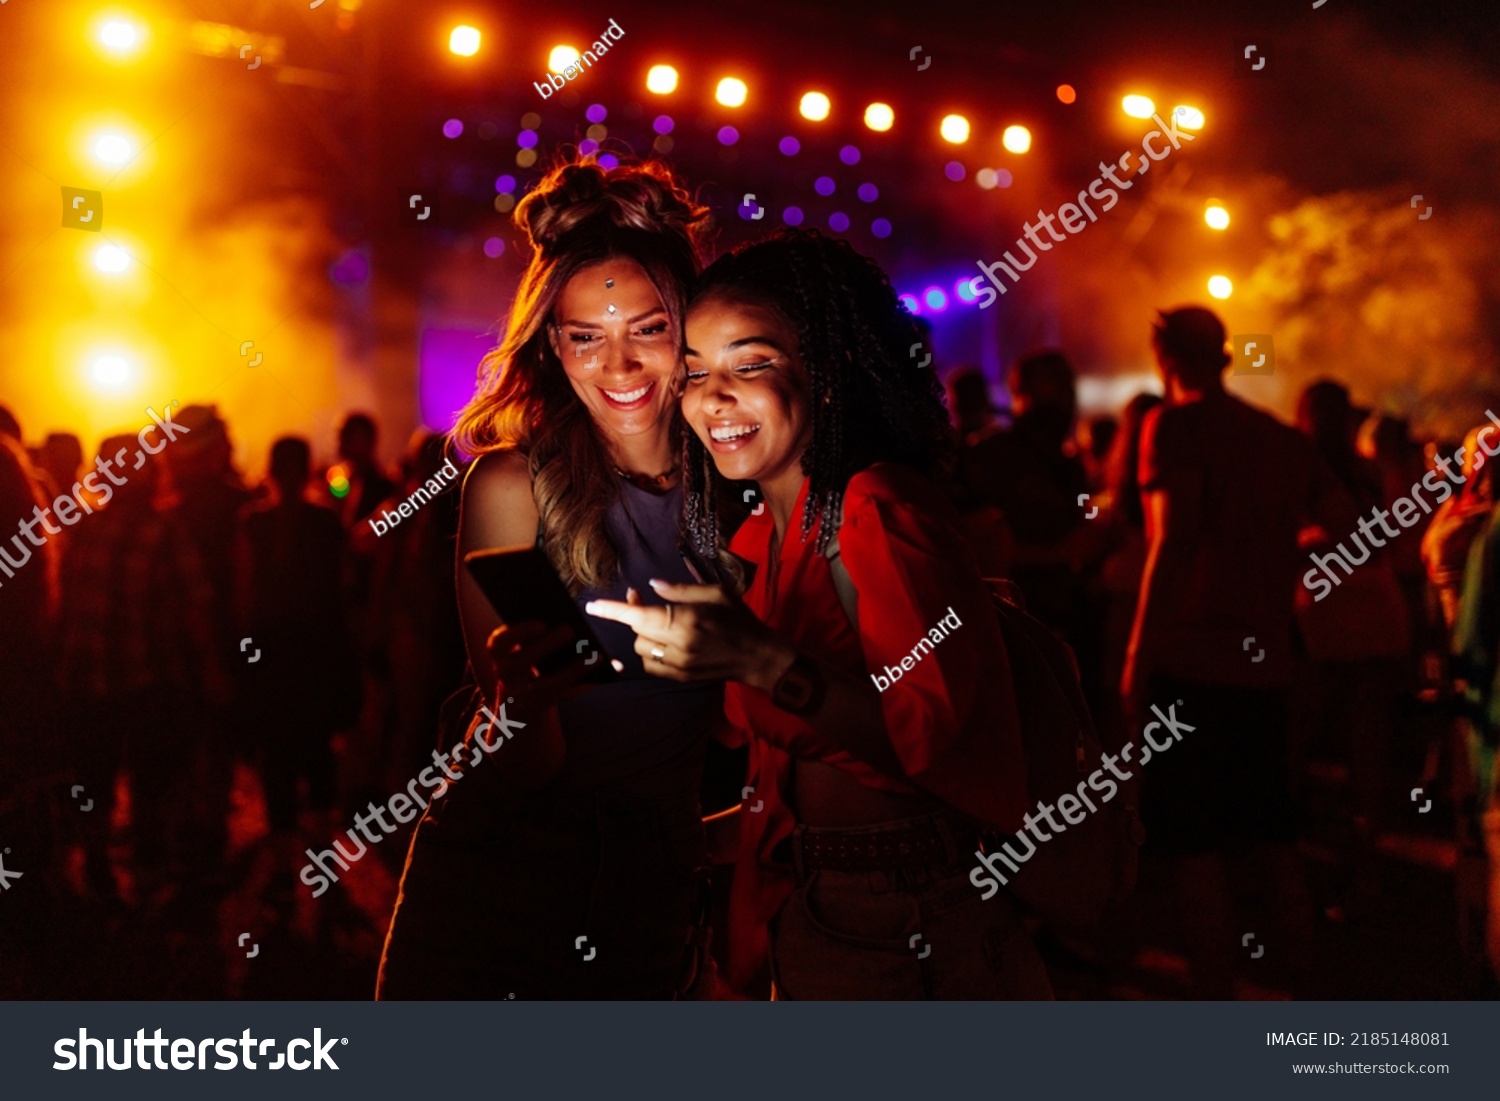 Two biracial women in a crowd at a concert using cellphone together #2185148081